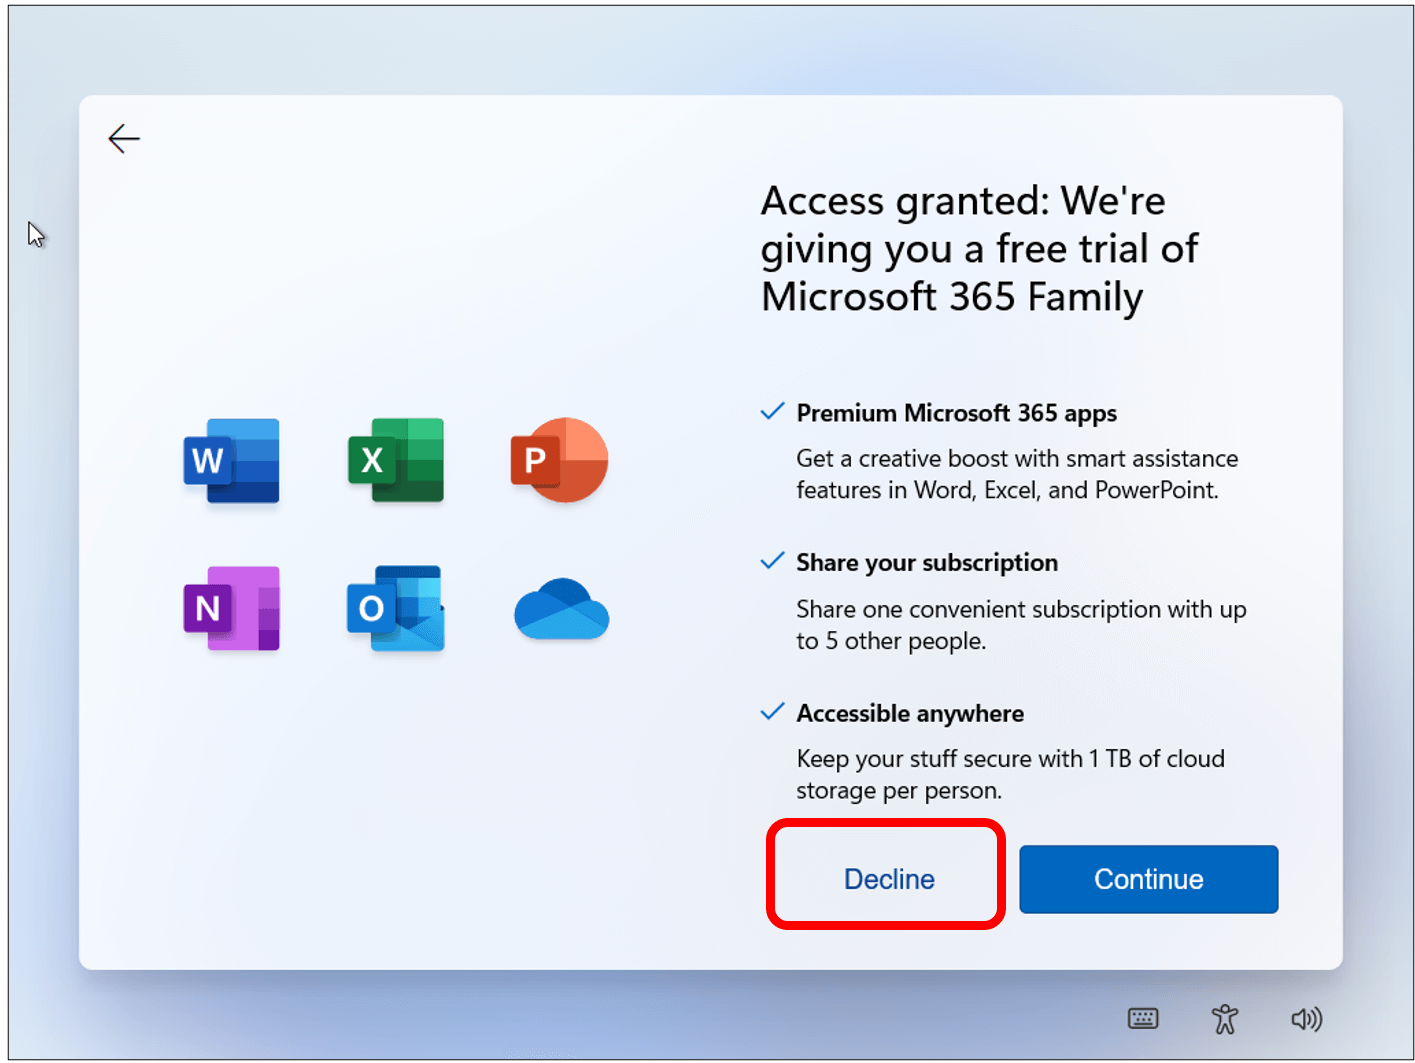 Screen offering a free trial for Microsoft 365 Family with Decline highlighted to show how to skip free trial.